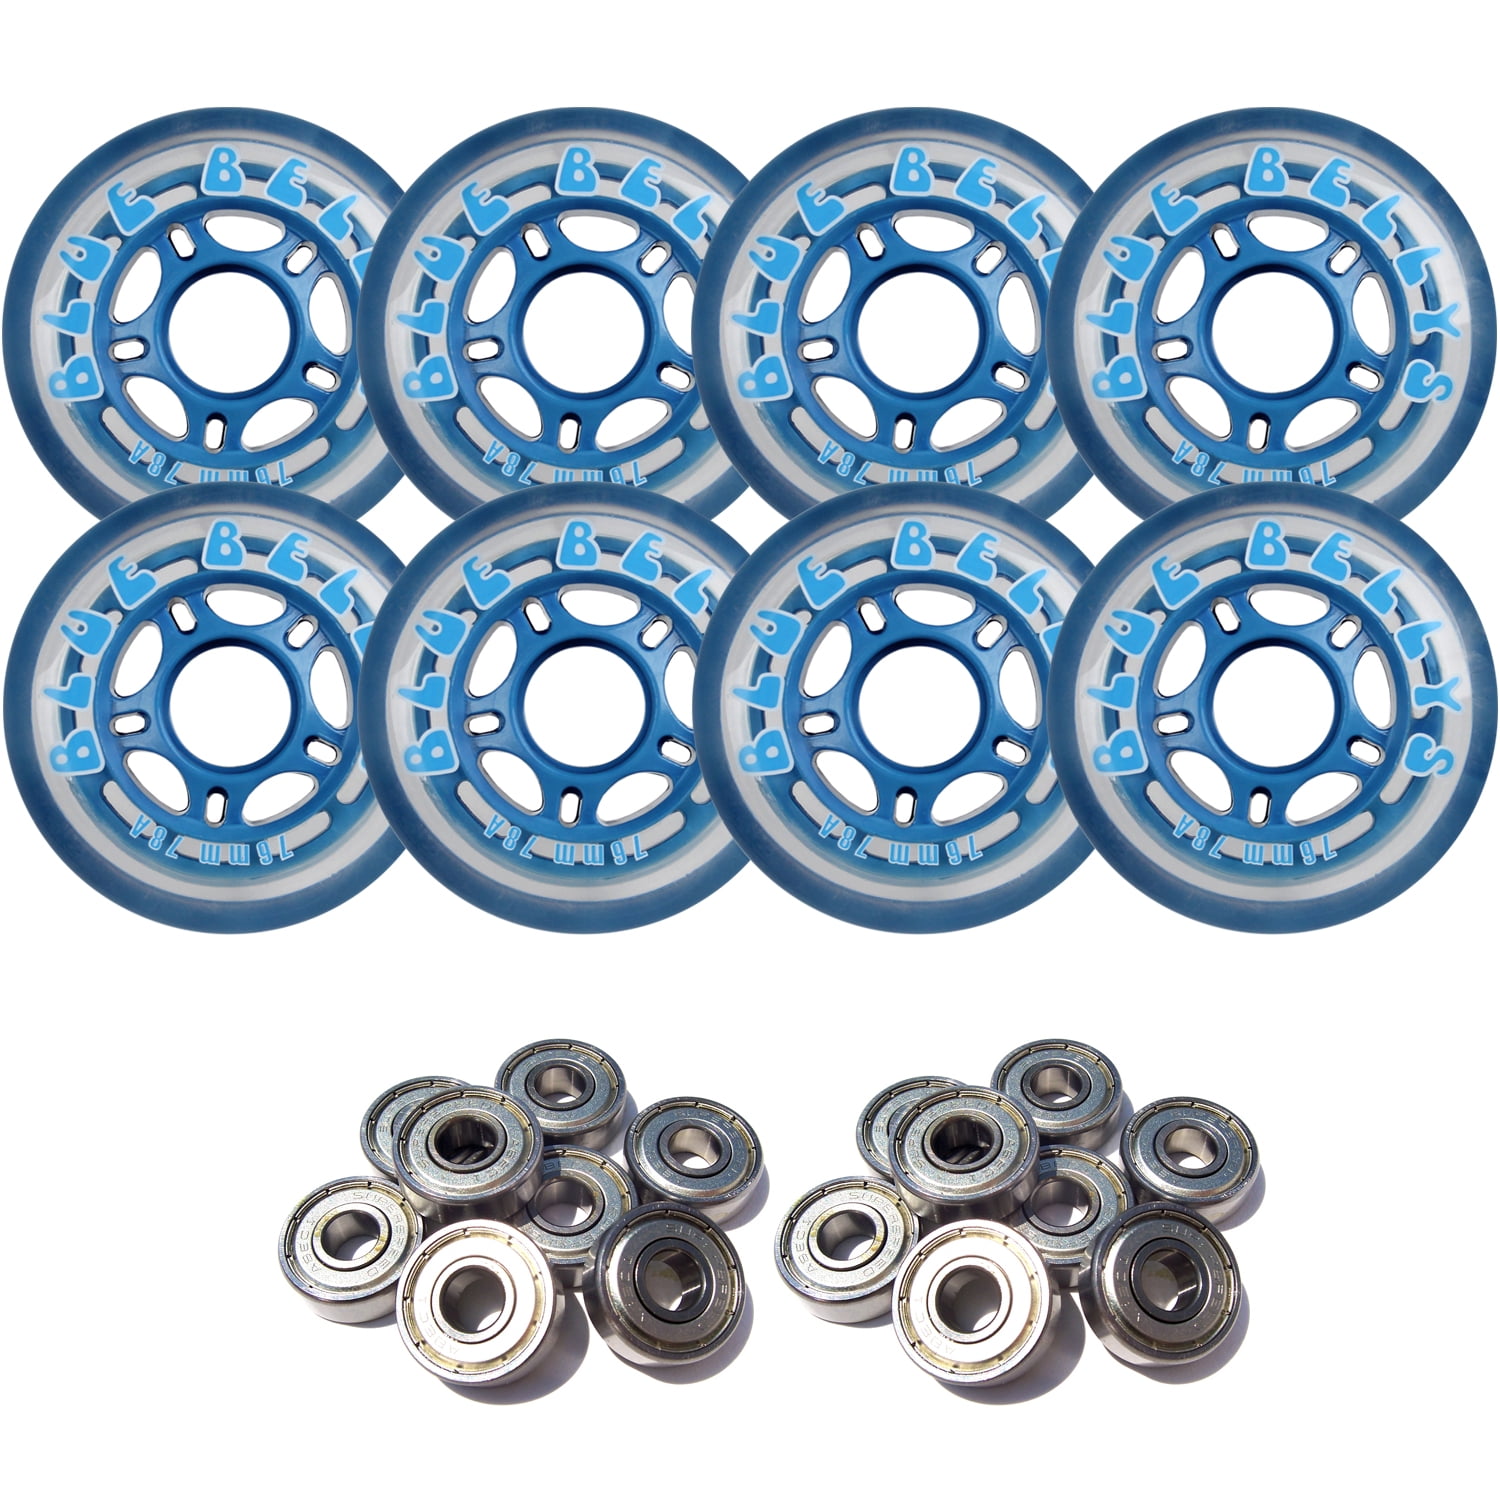 Details about   8 Pcs Roller Skating Wheels High Elasticity Bearings Skates Wheel Accessories 